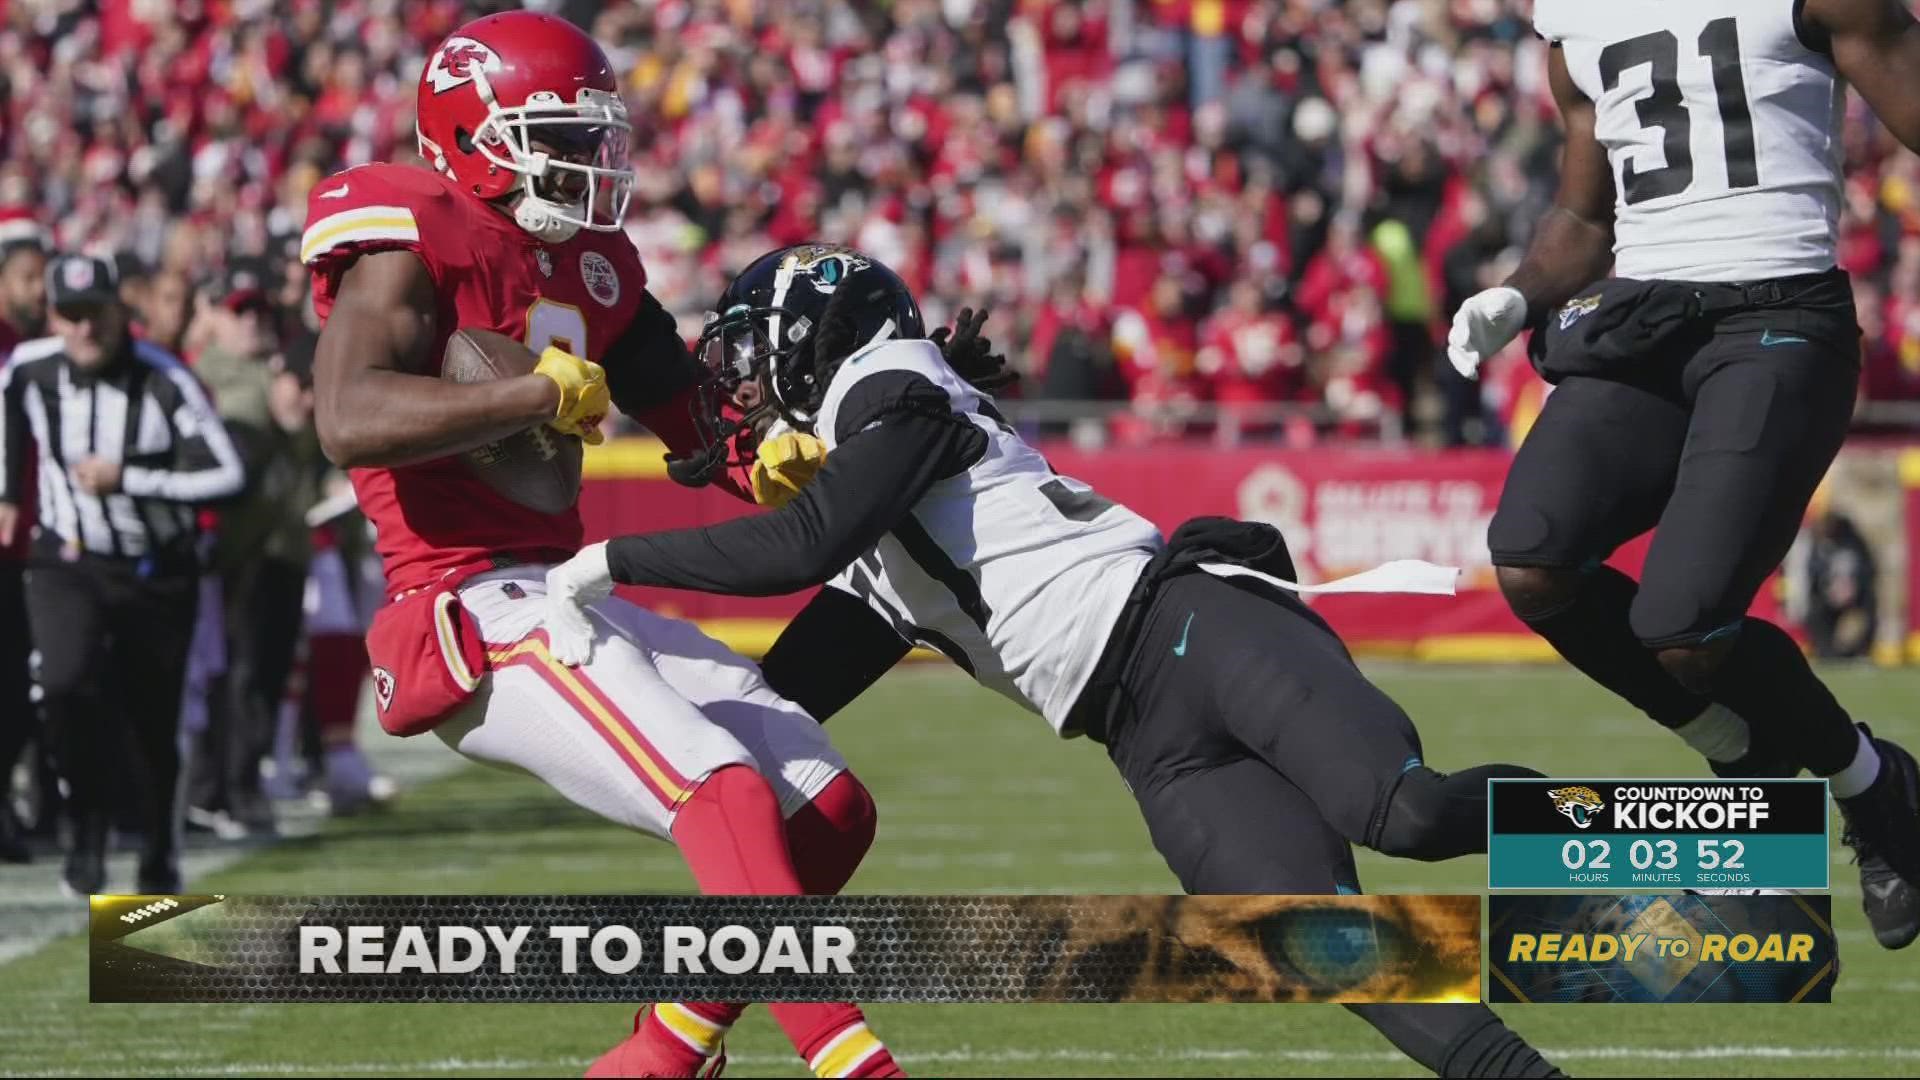 On Nov. 13, the Jags lost to the Chiefs 17 to 27. Can the Jaguars pull out the win this time?